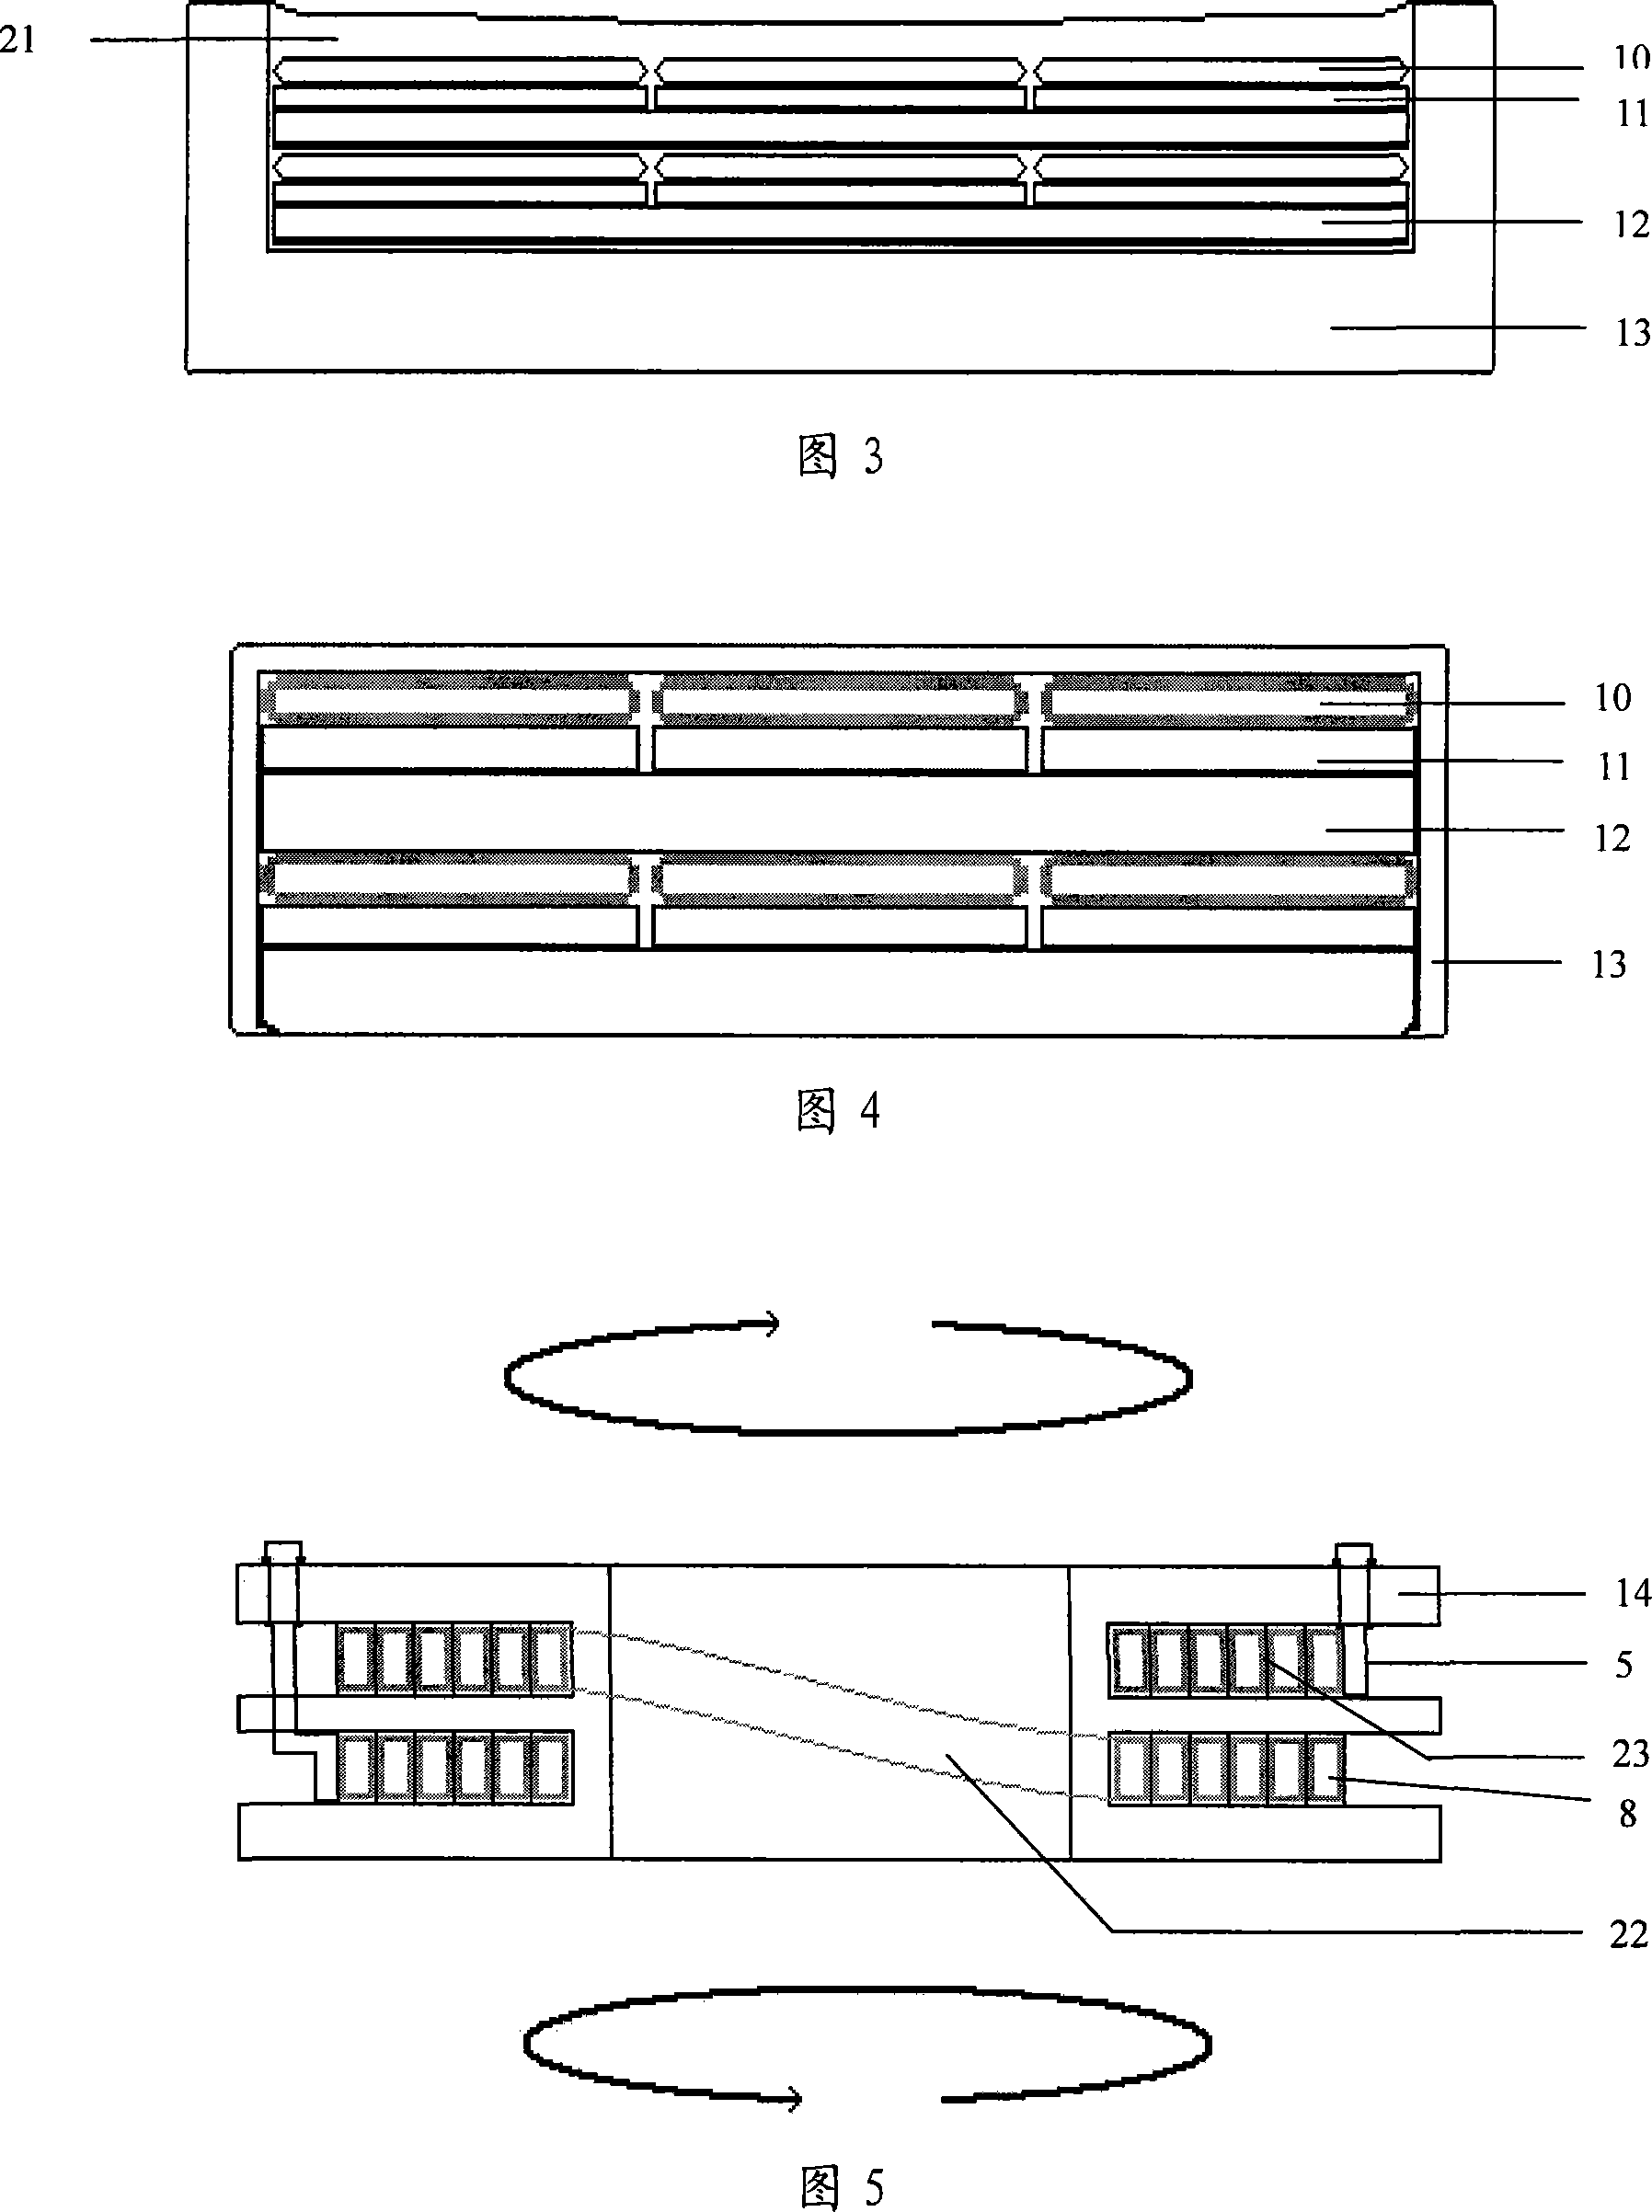 High-temperature superconductor high-voltage transformer for serving as low current high-voltage power and application thereof